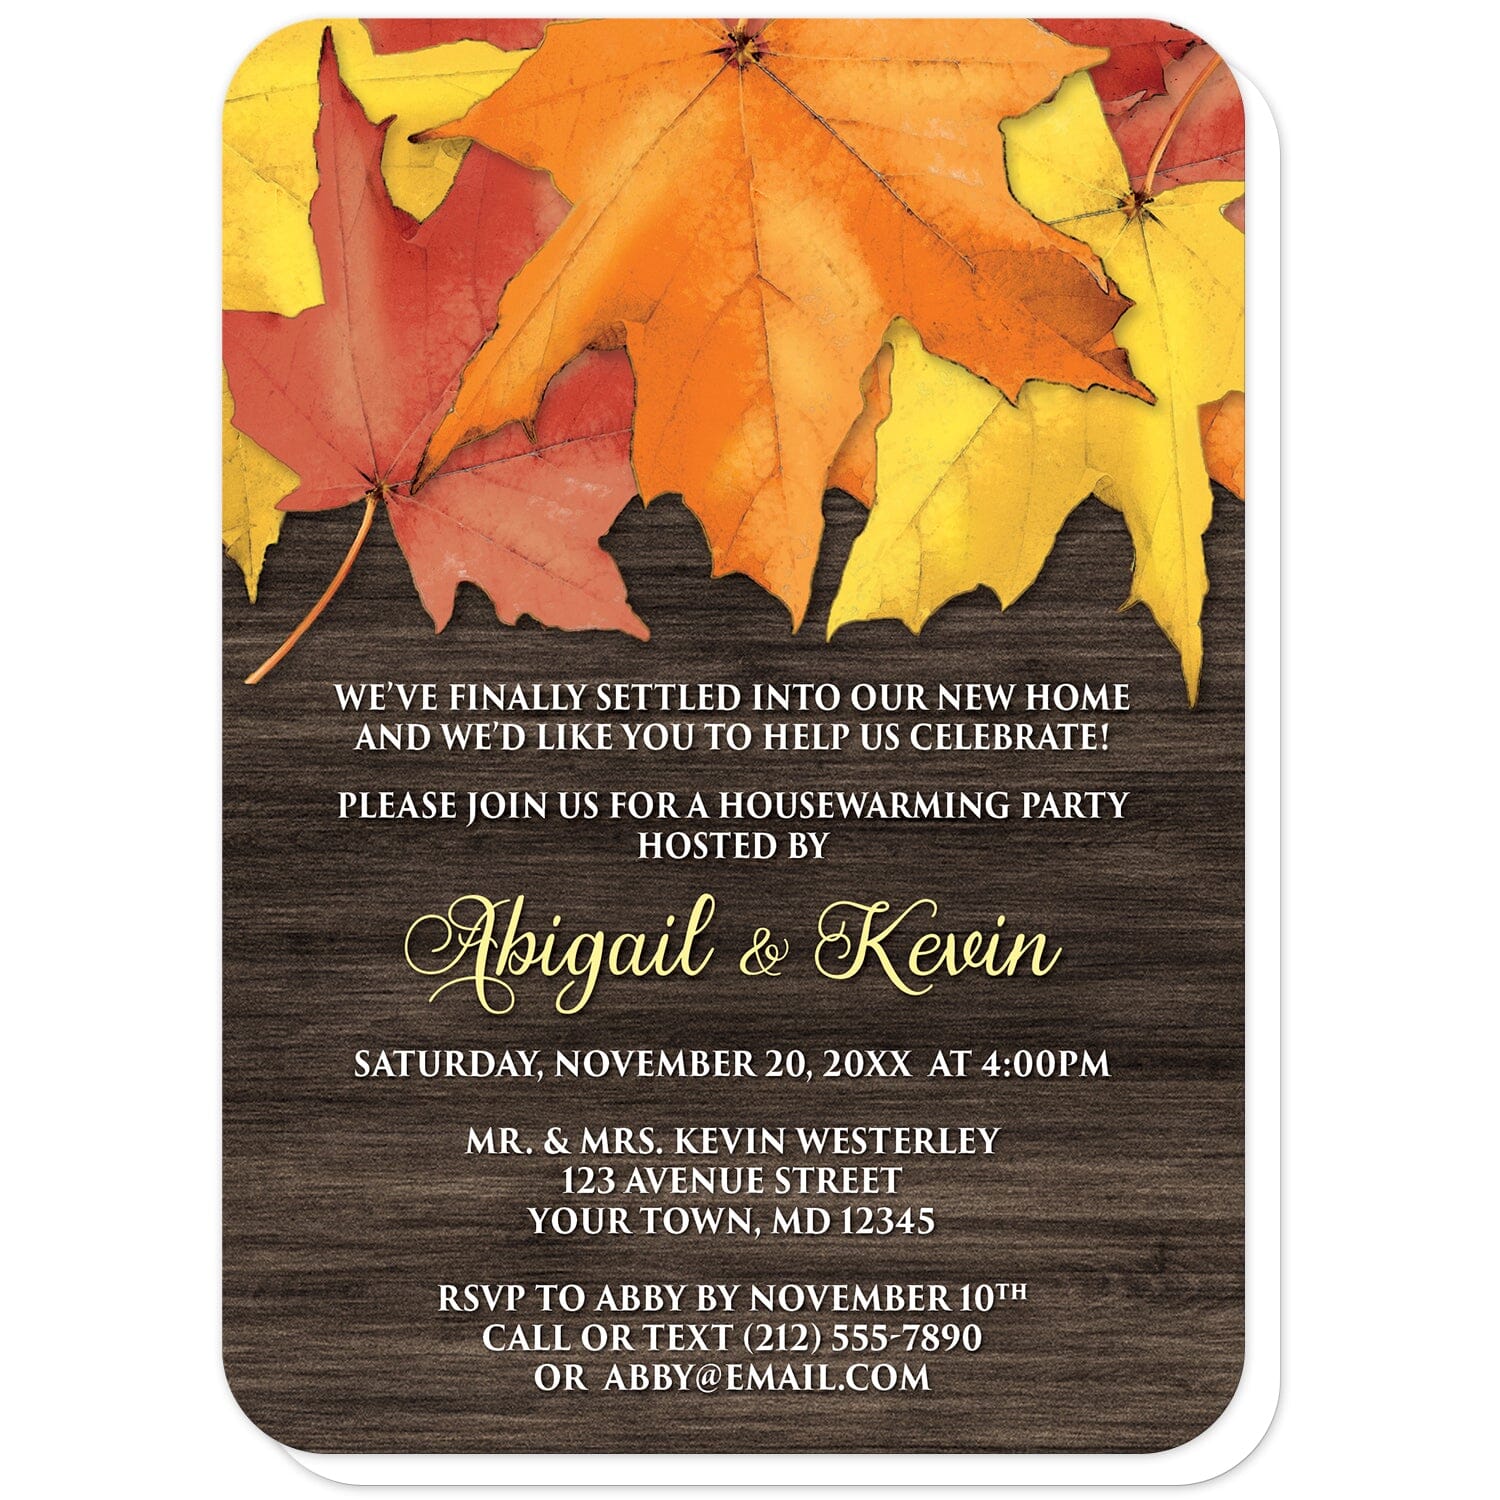 Rustic Autumn Leaves Wood Housewarming Invitations (with rounded corners) at Artistically Invited. Southern-inspired rustic autumn leaves wood housewarming invitations with an arrangement of rustic yellow, orange, and red fall leaves along the top over a dark brown wood pattern. Your personalized housewarming event details are custom printed in yellow and white over the rustic wood background. 